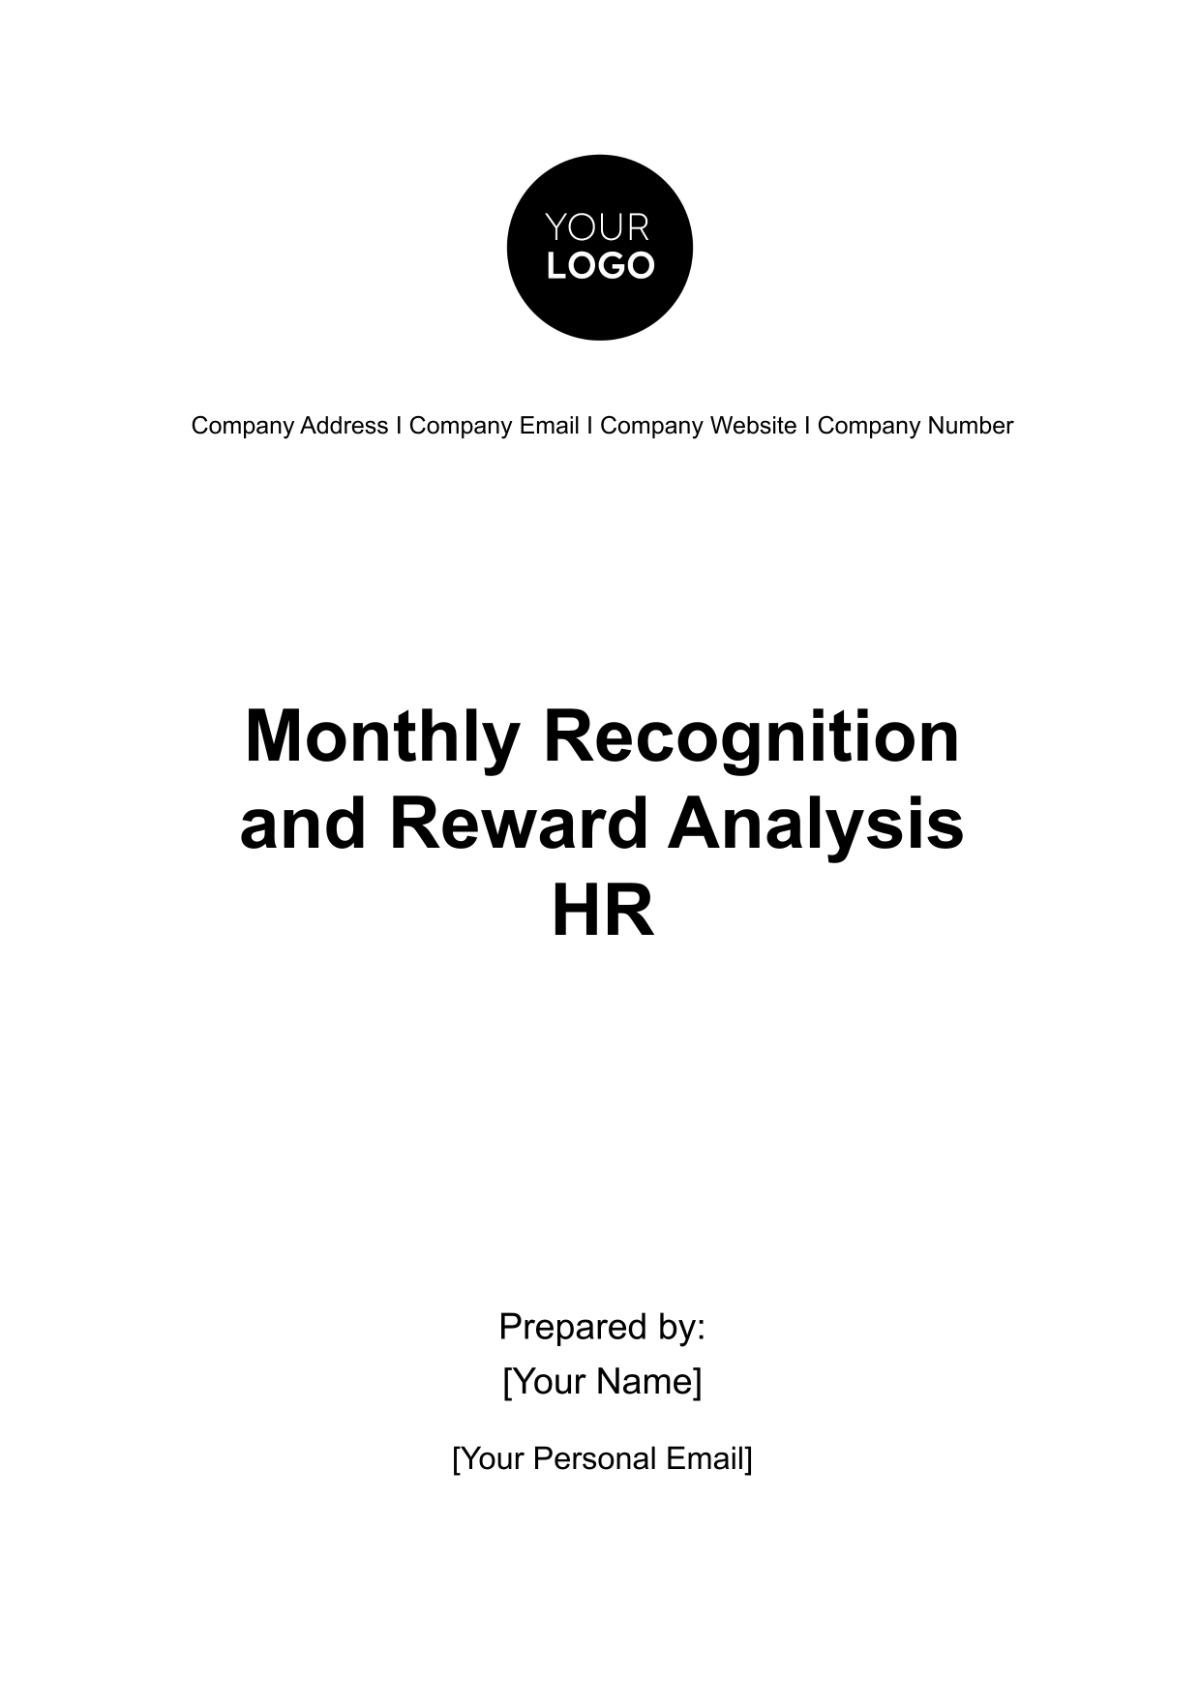 Free Monthly Recognition and Reward Analysis HR Template